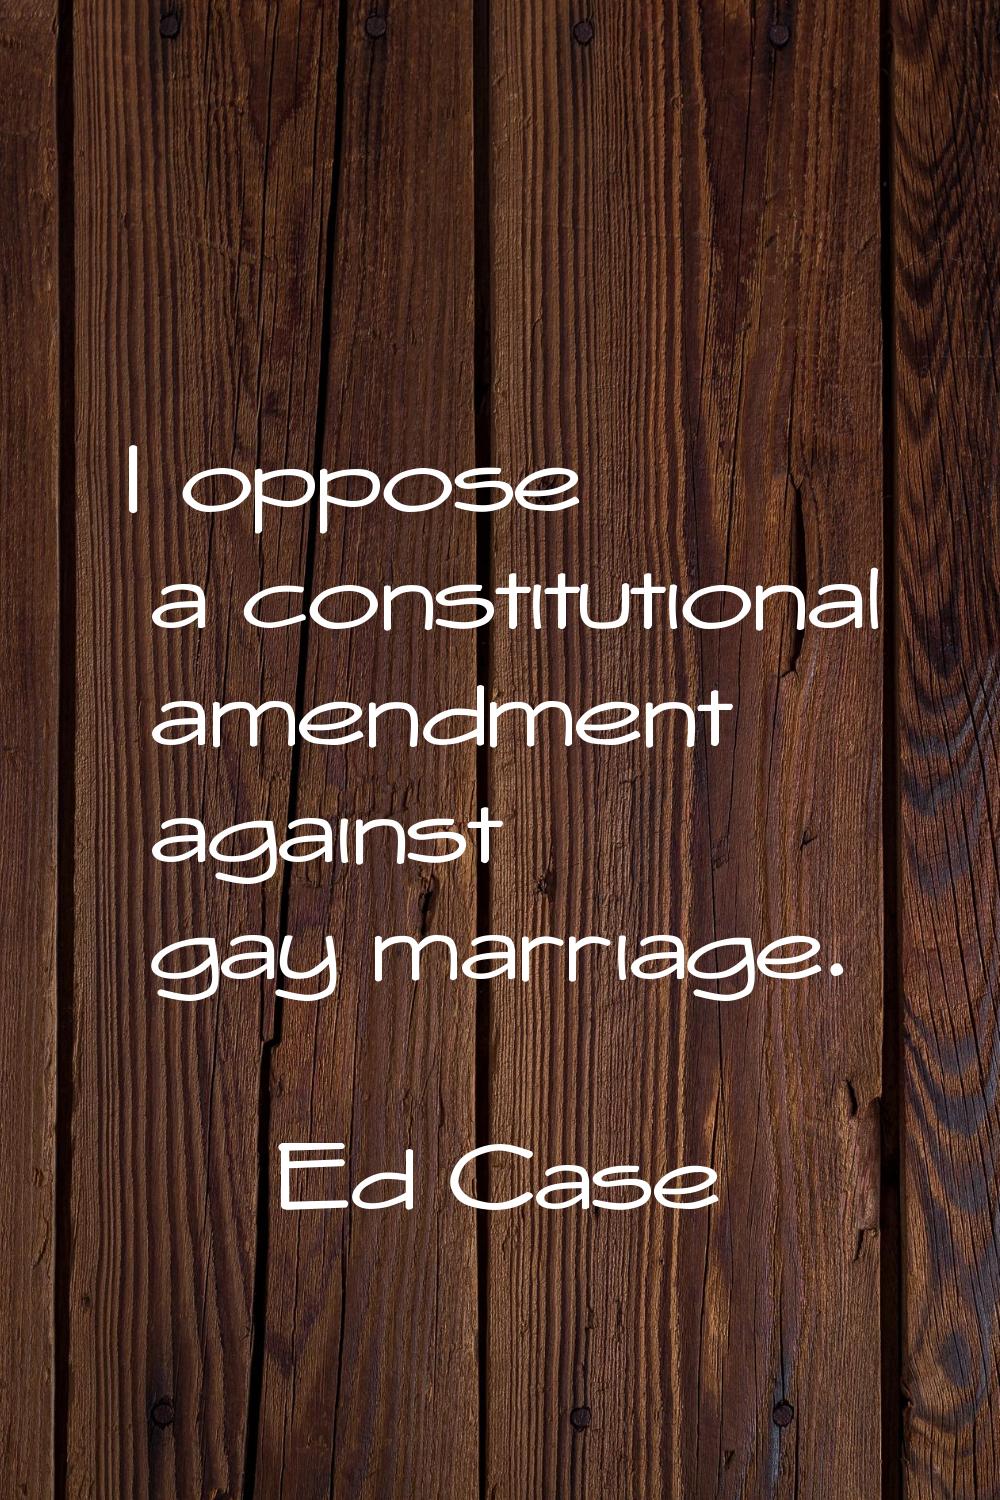 I oppose a constitutional amendment against gay marriage.